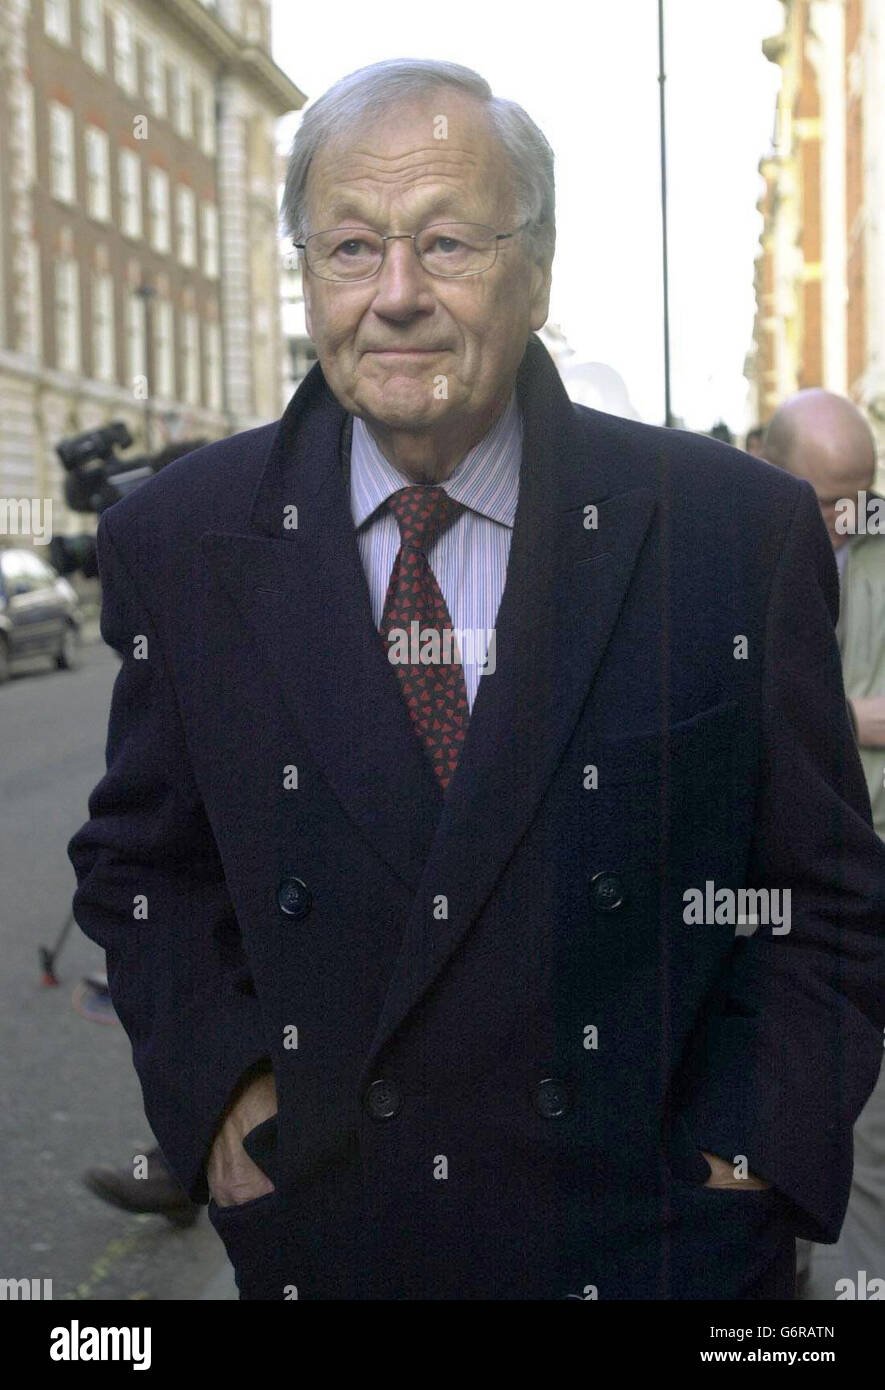 Anthony Haines arrives at the General Medical Council, London. Mr Haines is one of seven doctors, some who no longer work at the private clinic for heroin addicts who was today facing a disciplinary hearing over allegations of inappropriate treatment in what is expected to be one of the biggest cases in the General Medical Council's 145-year history. The charges relate to alleged inappropriate prescriptions of methadone, a widely-used heroin substitute, for patients at the Stapleford Centre, which has sites in Ongar, Essex, and Belgravia, central London. Stock Photo